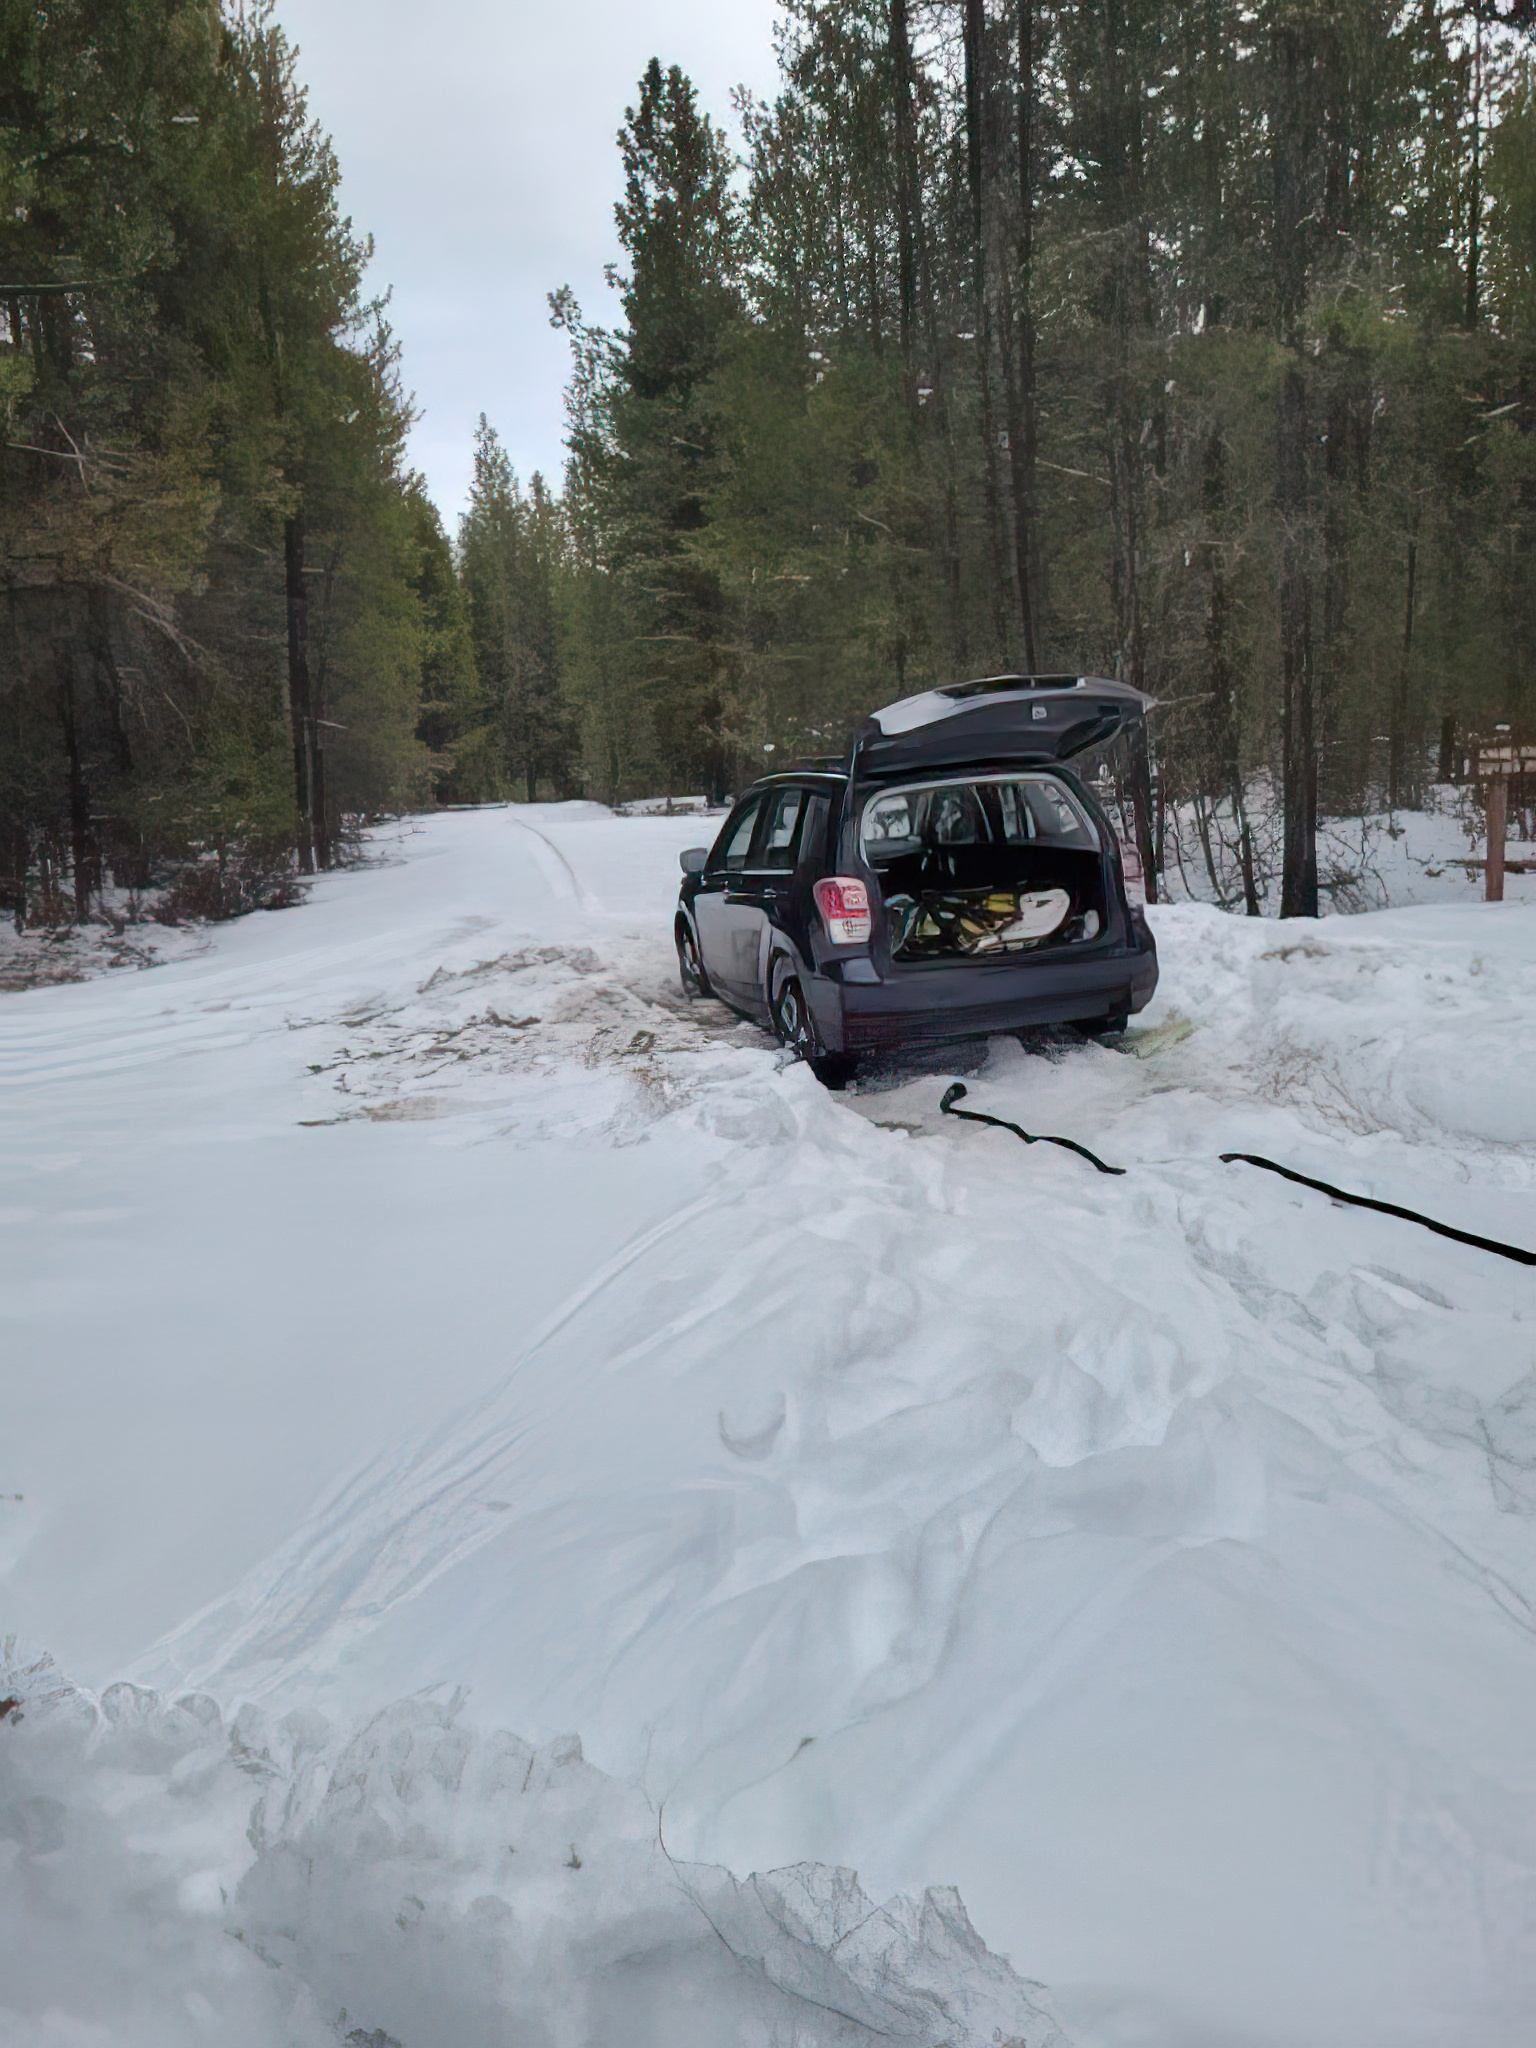 off-road recovery in the snow in Oregon